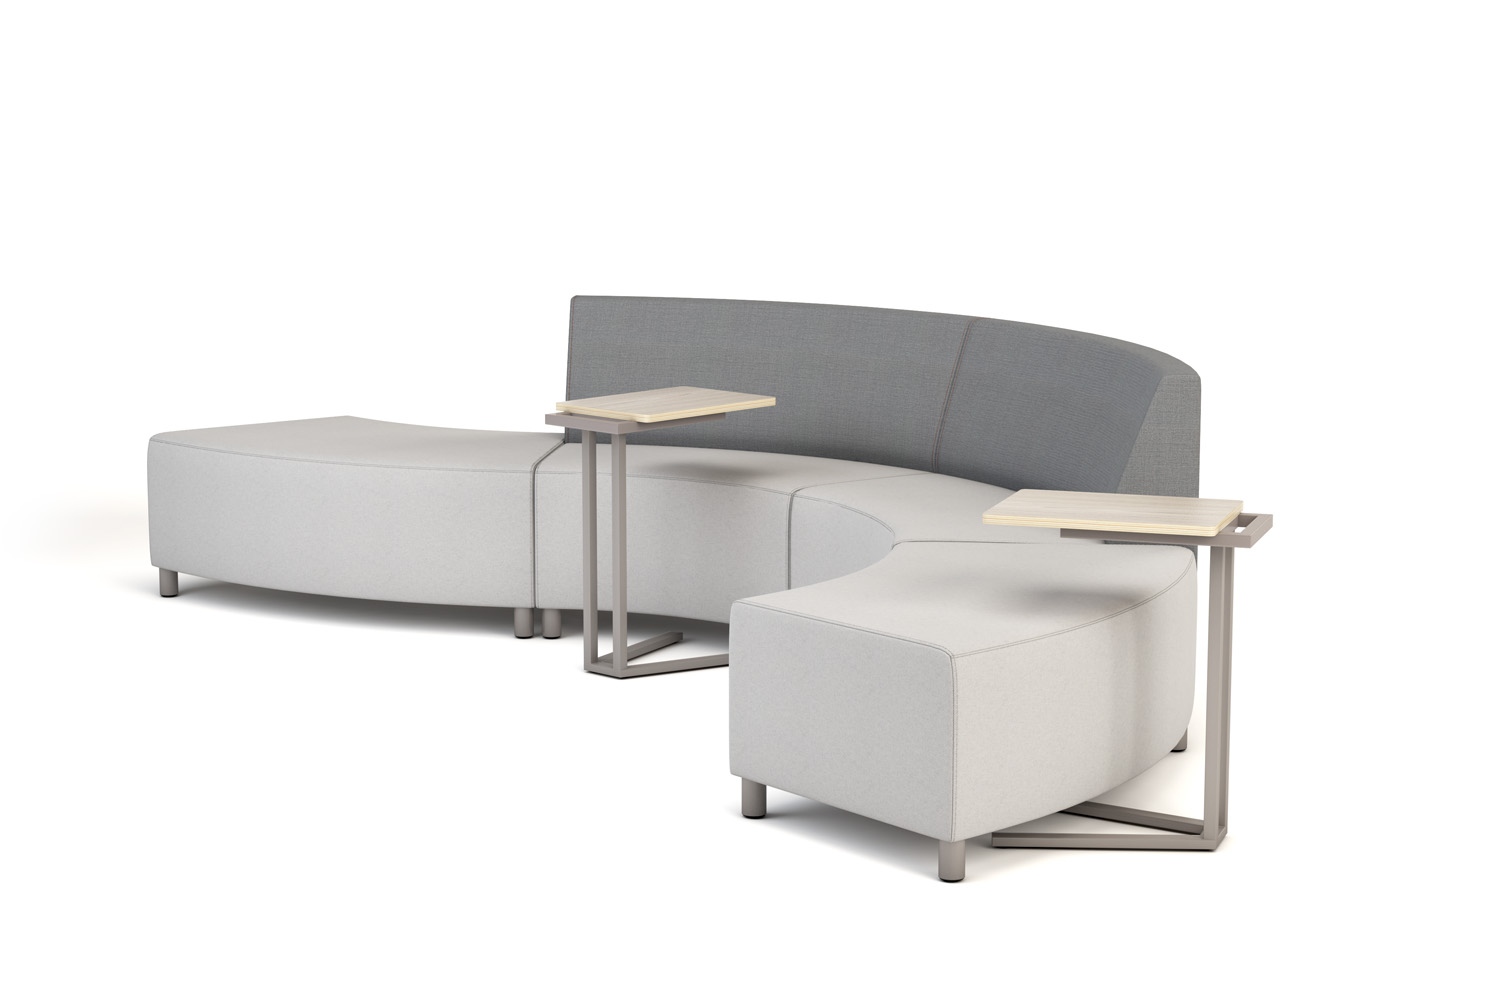 Clyde Tables with Ravan Modular seating Environment